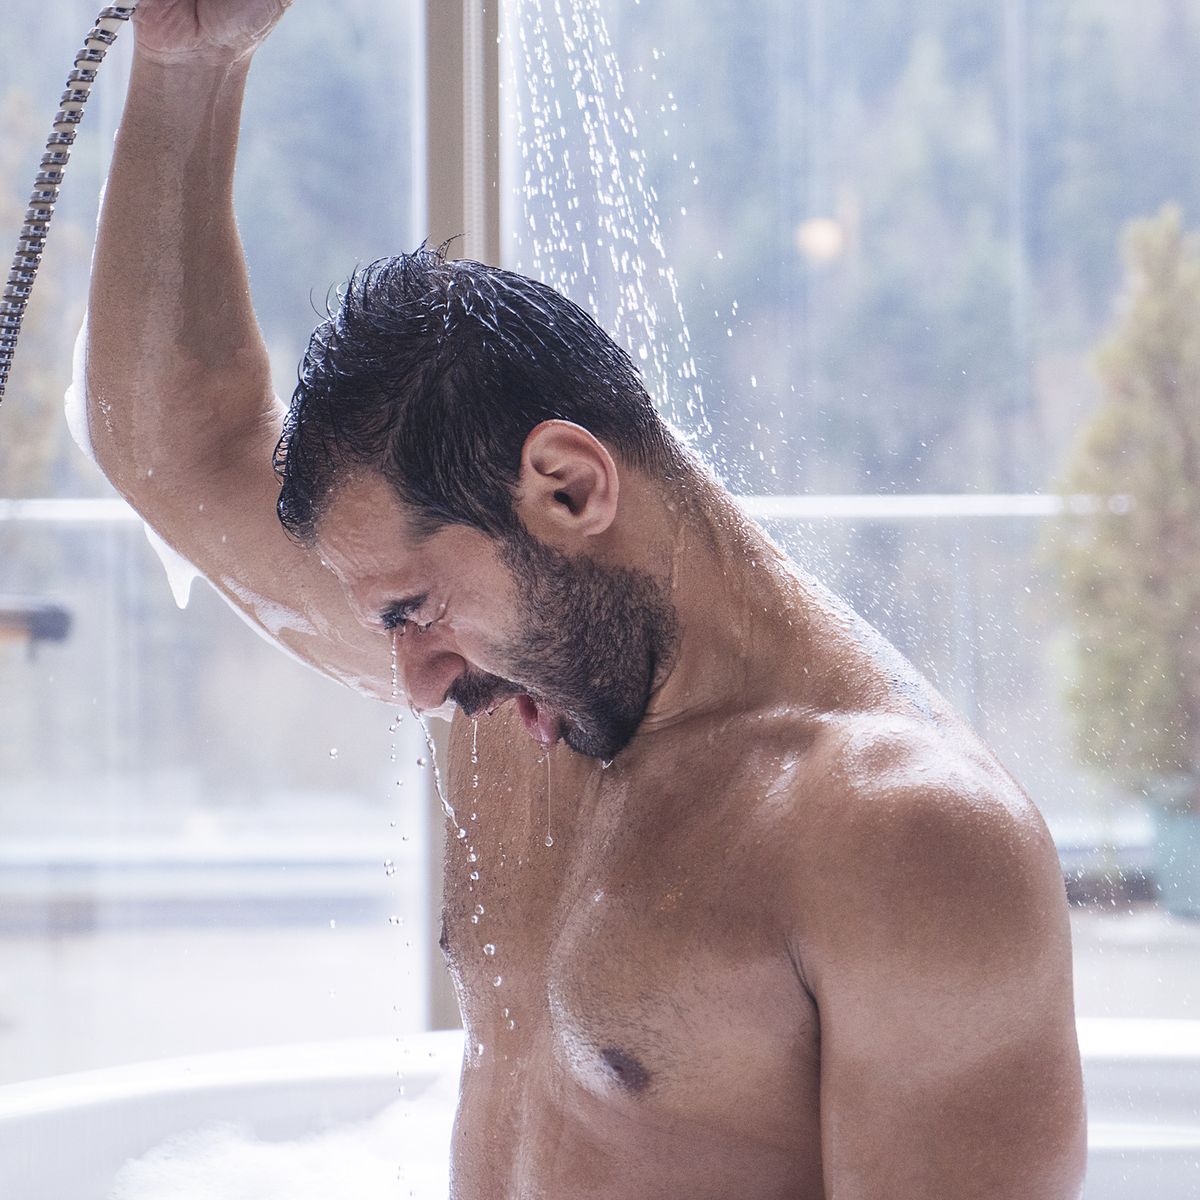 https://hips.hearstapps.com/hmg-prod/images/man-having-shower-in-a-hot-tub-with-a-forest-view-royalty-free-image-1686316758.jpg?crop=0.66698xw:1xh;center,top&resize=1200:*